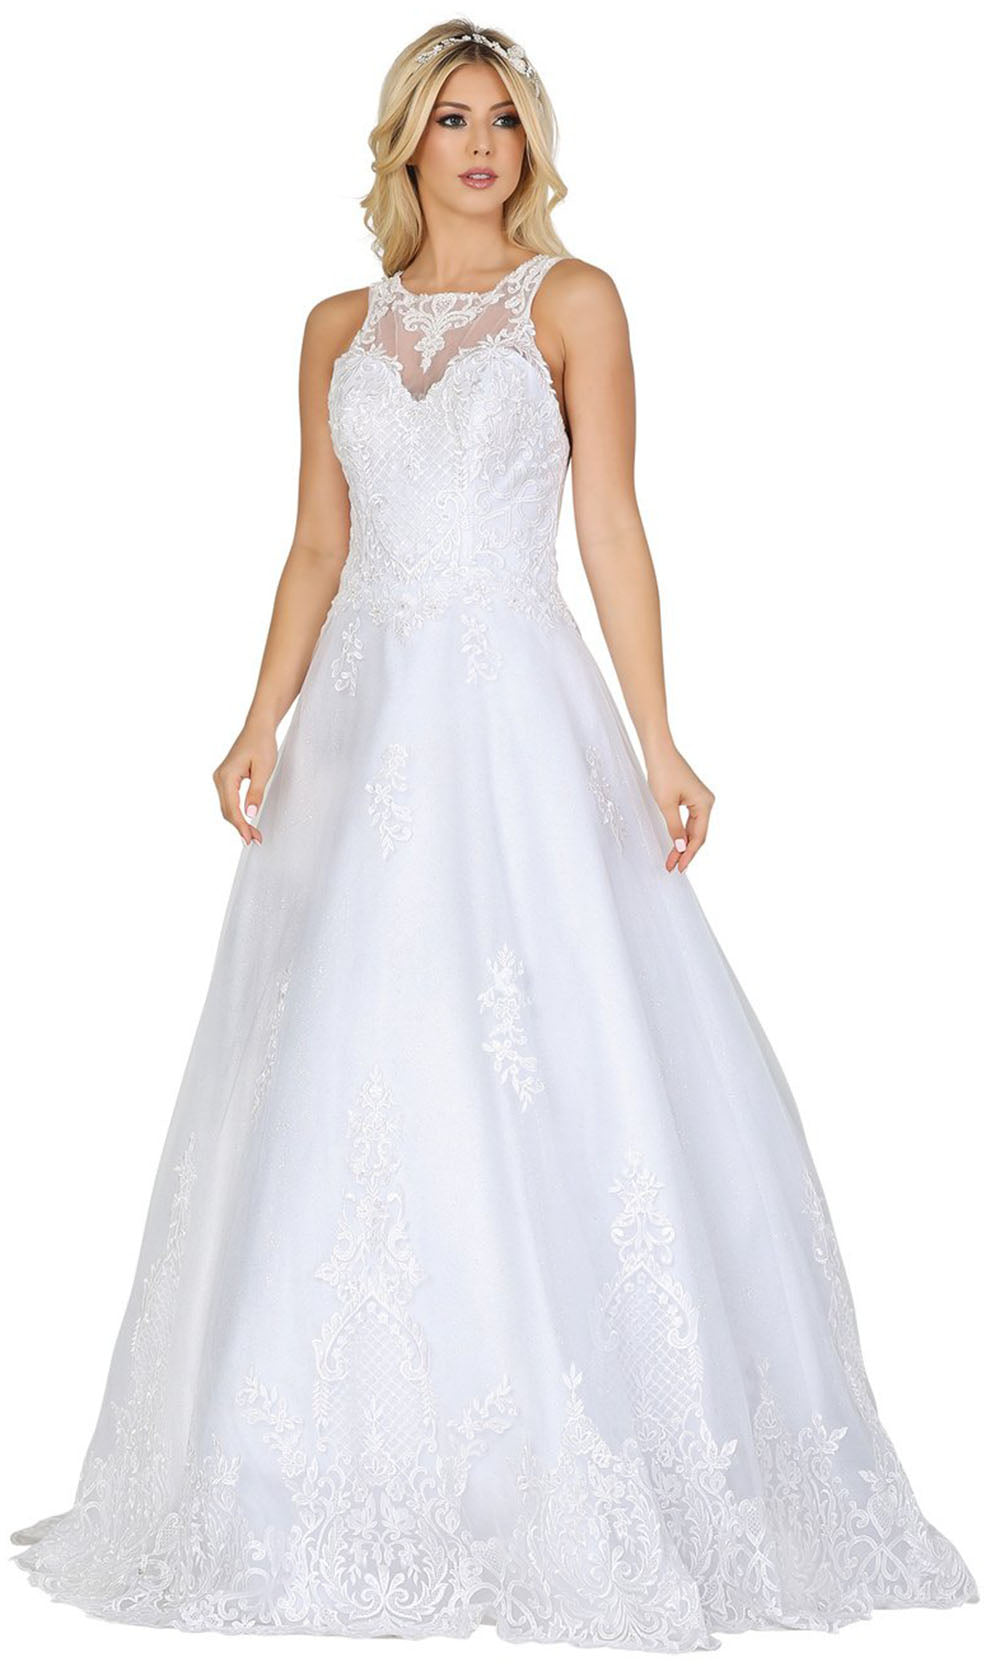 Dancing Queen - 133 Sleeveless Jewel Embroidered Gown In White